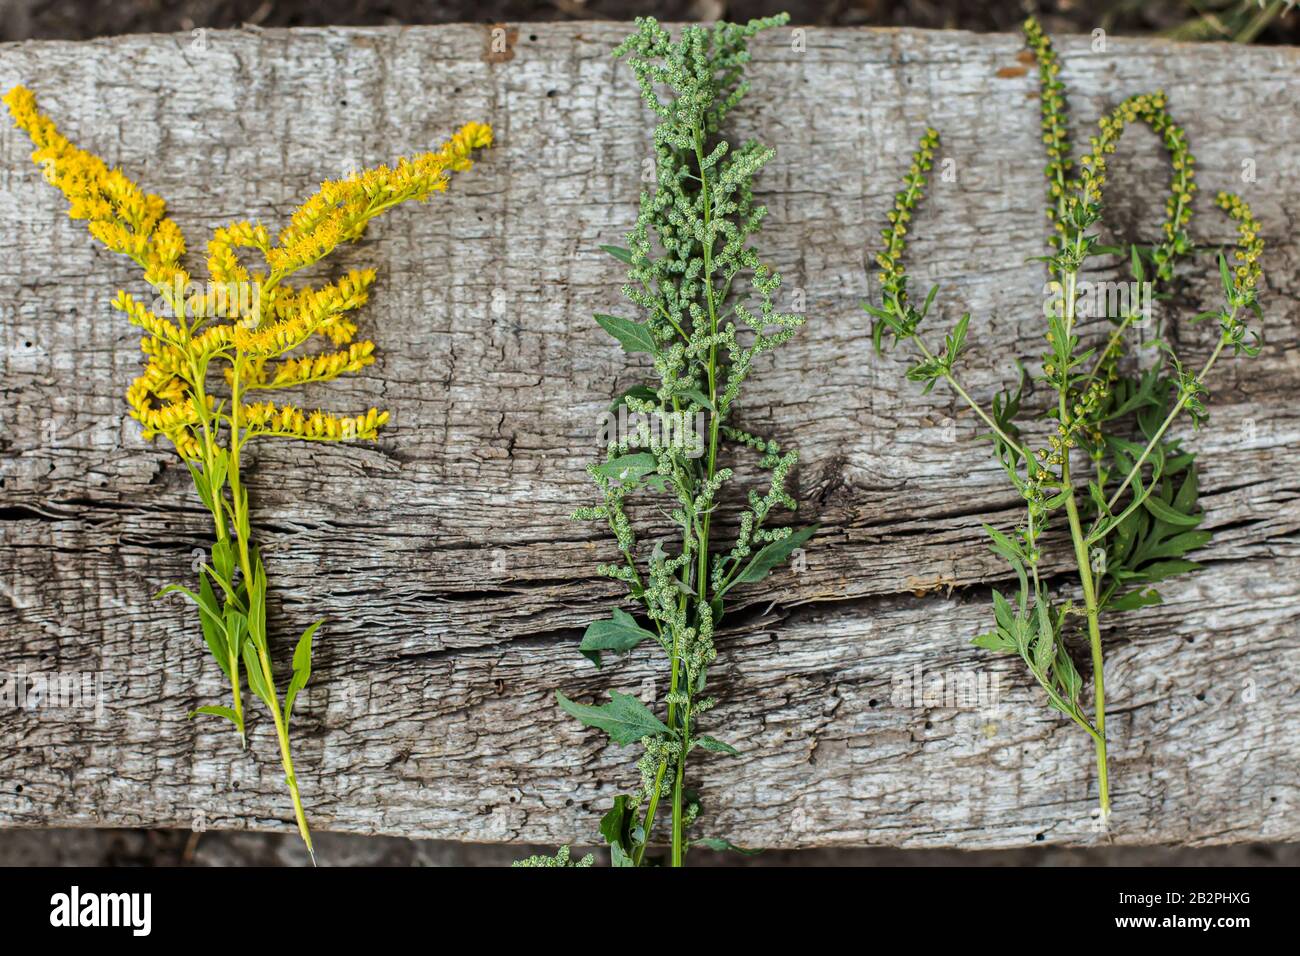 Comparison of Solidago, wormwood or Artemisia absinthium and Ambrosia flowering in summer. Soft focus. Collected medicinal plants on a concrete slab. Stock Photo